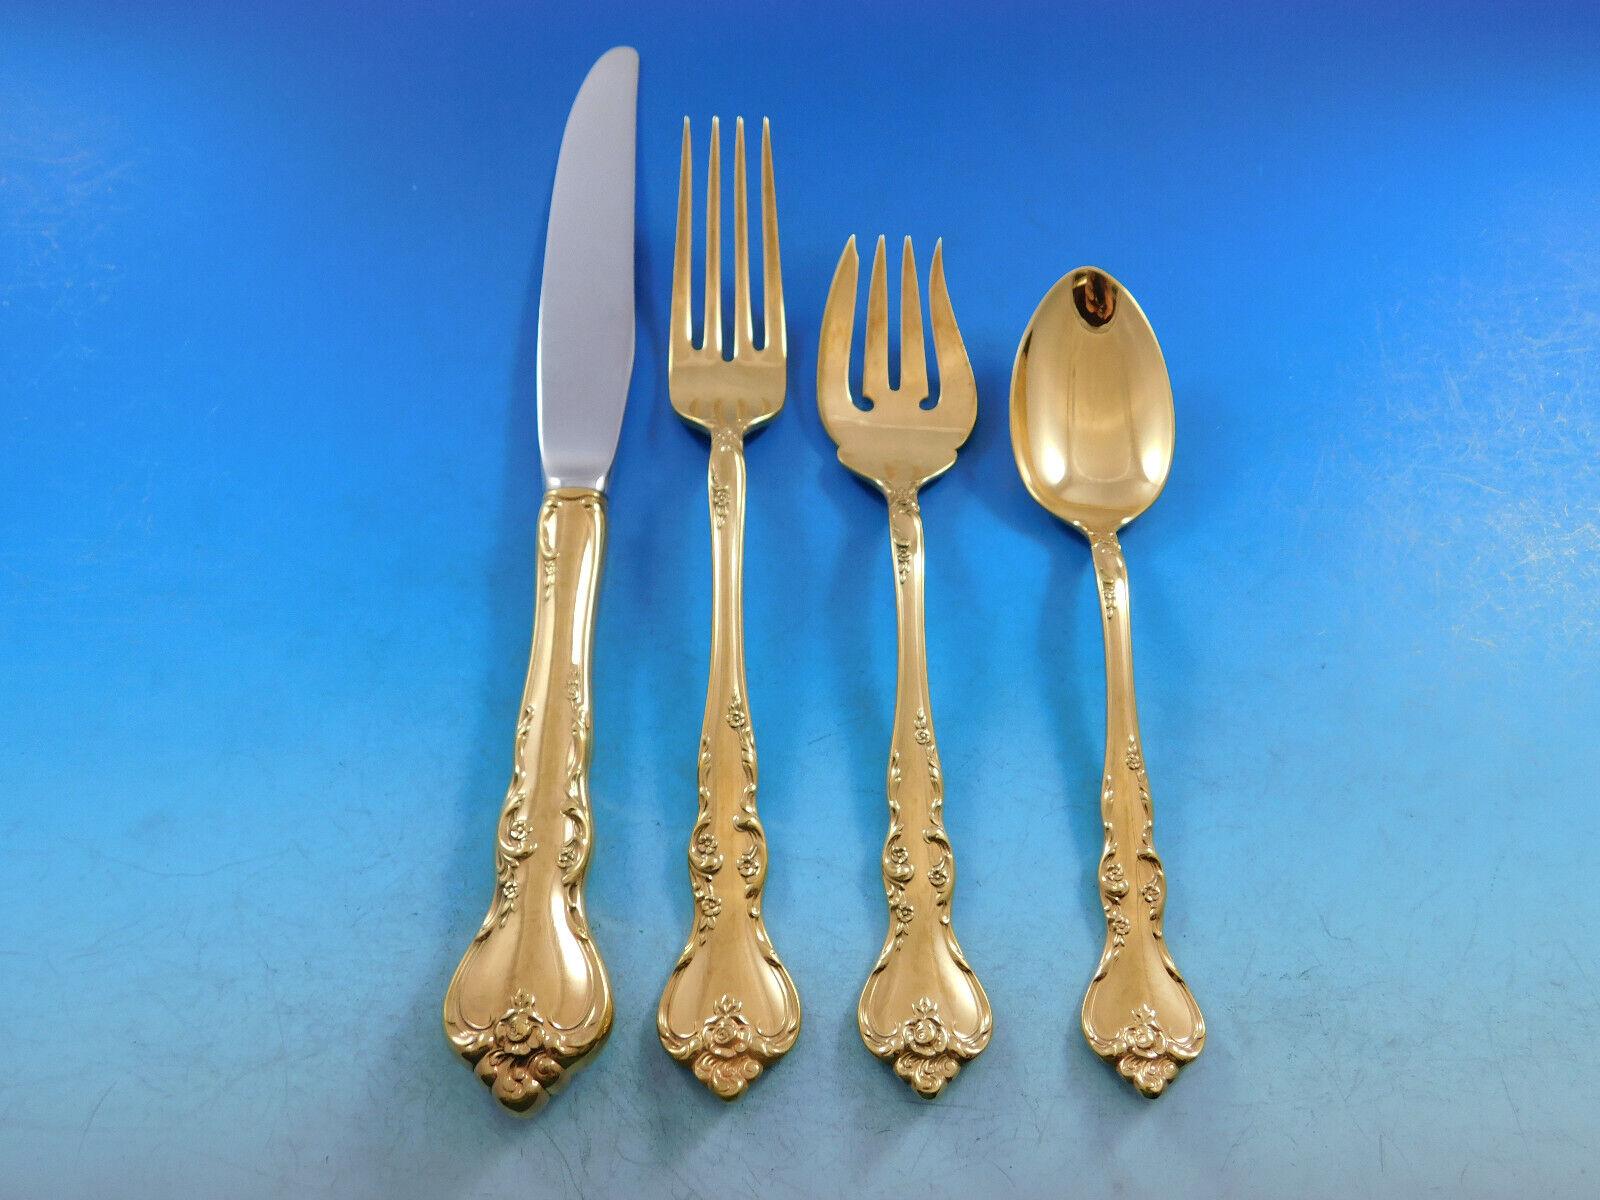 Fabulous Golden Savannah by Reed & Barton sterling silver flatware set - 60 pieces. This pattern is elegant and timeless. The pieces are vermeil - completely gold washed over sterling silver. This set includes:

12 Knives w/stainless blades, 9